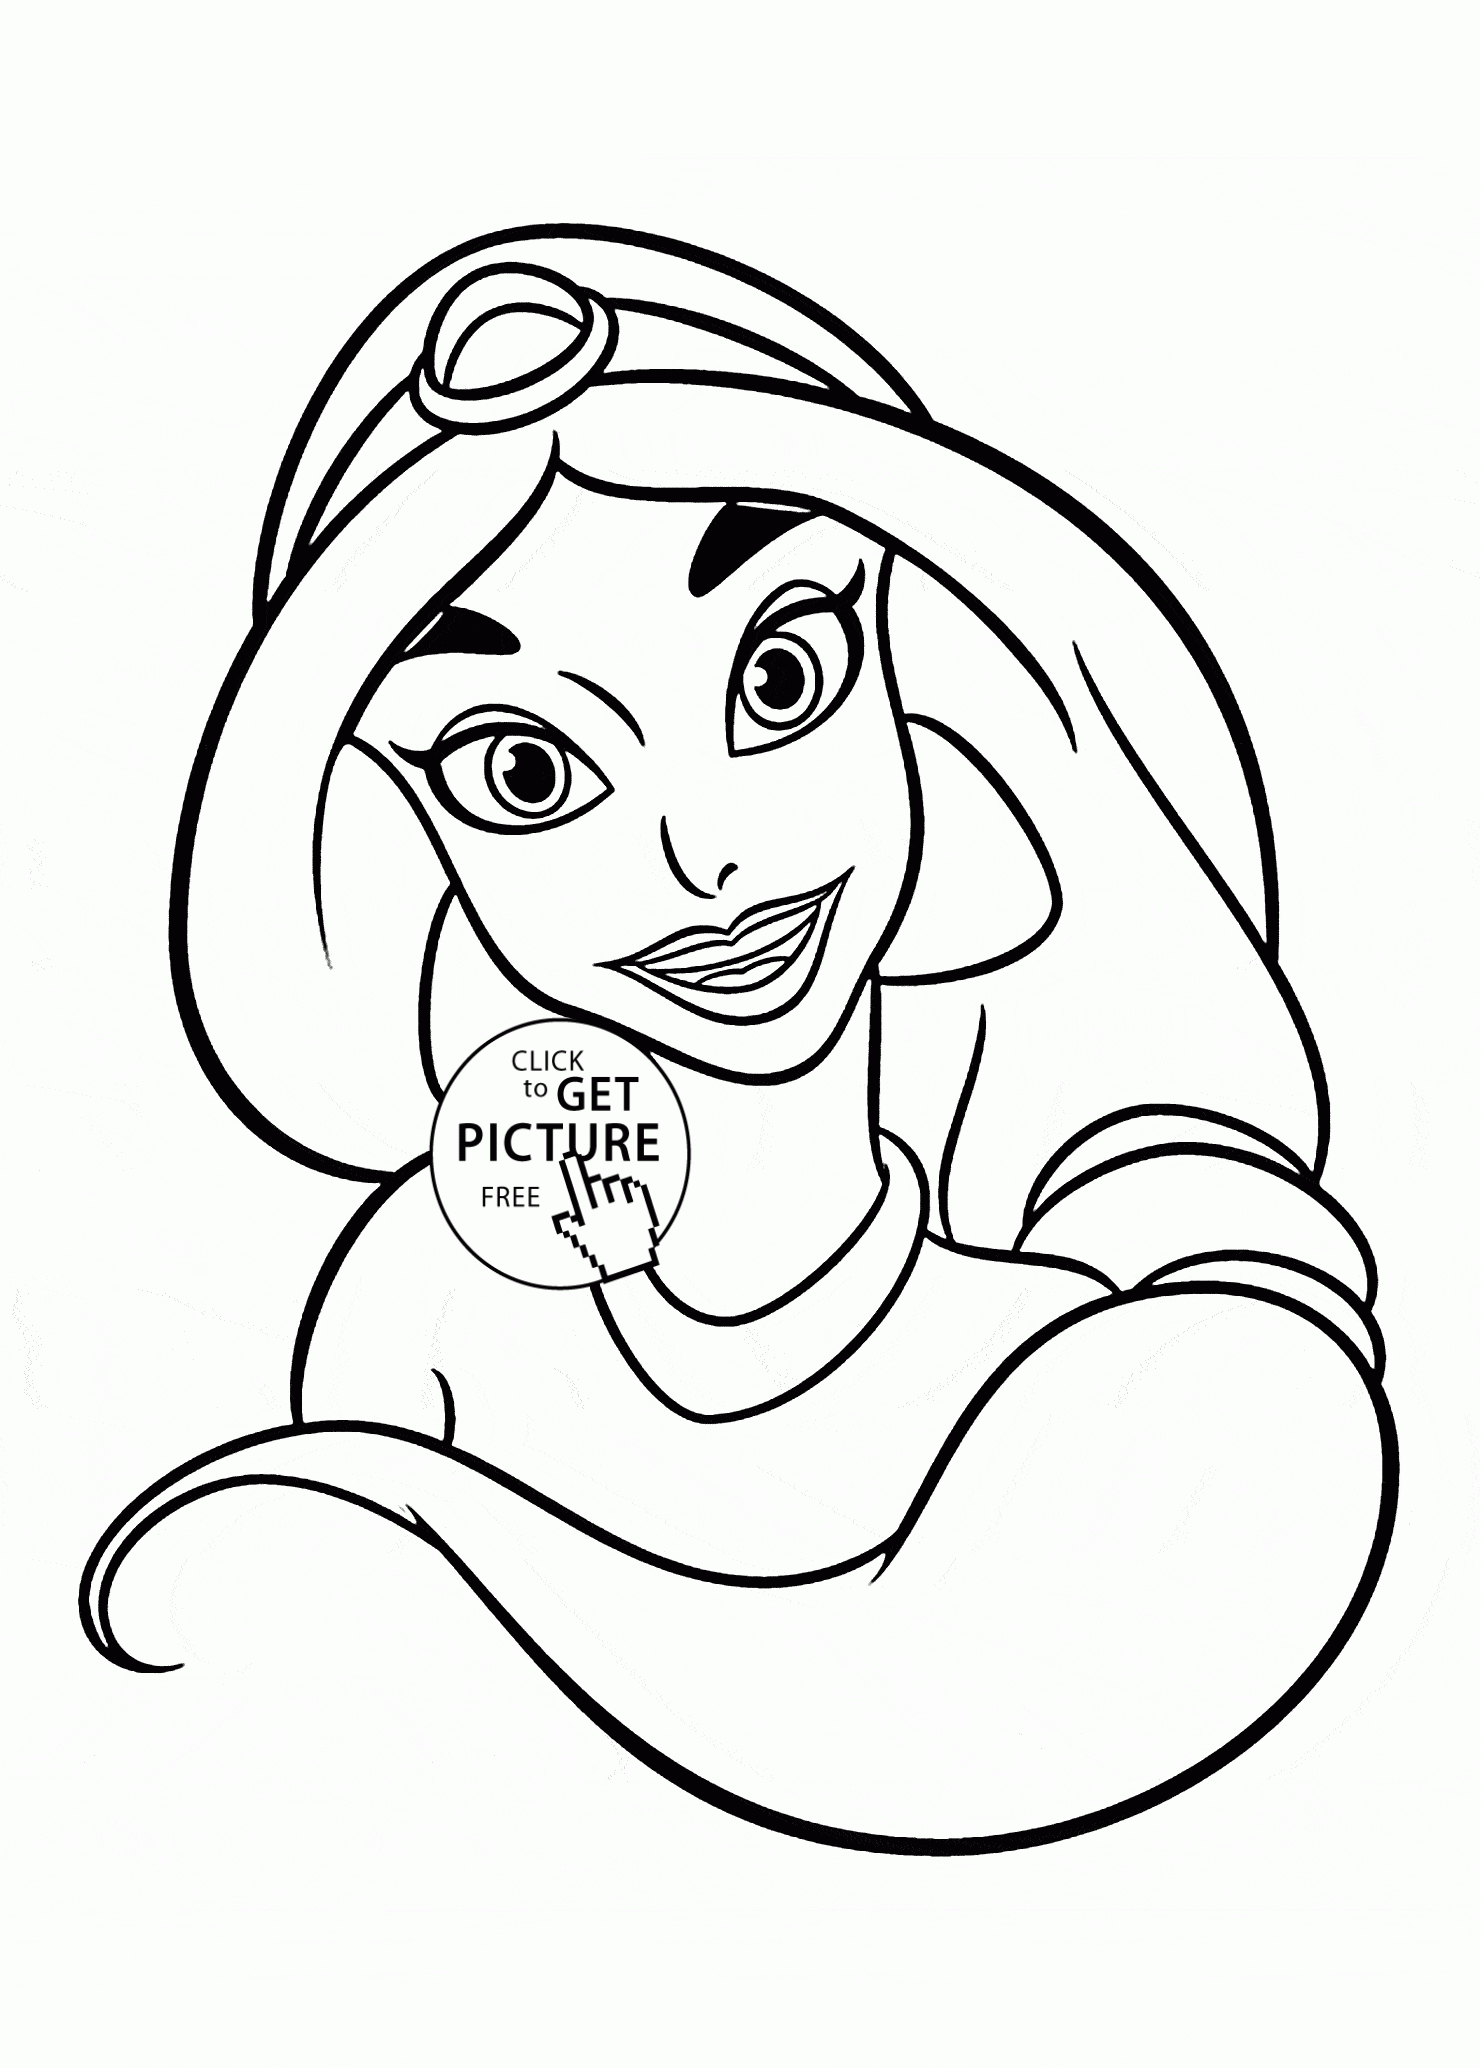 Disney Princess Jasmine Face Coloring Page For Kids, Disney Princess - Free Printable Princess Jasmine Coloring Pages